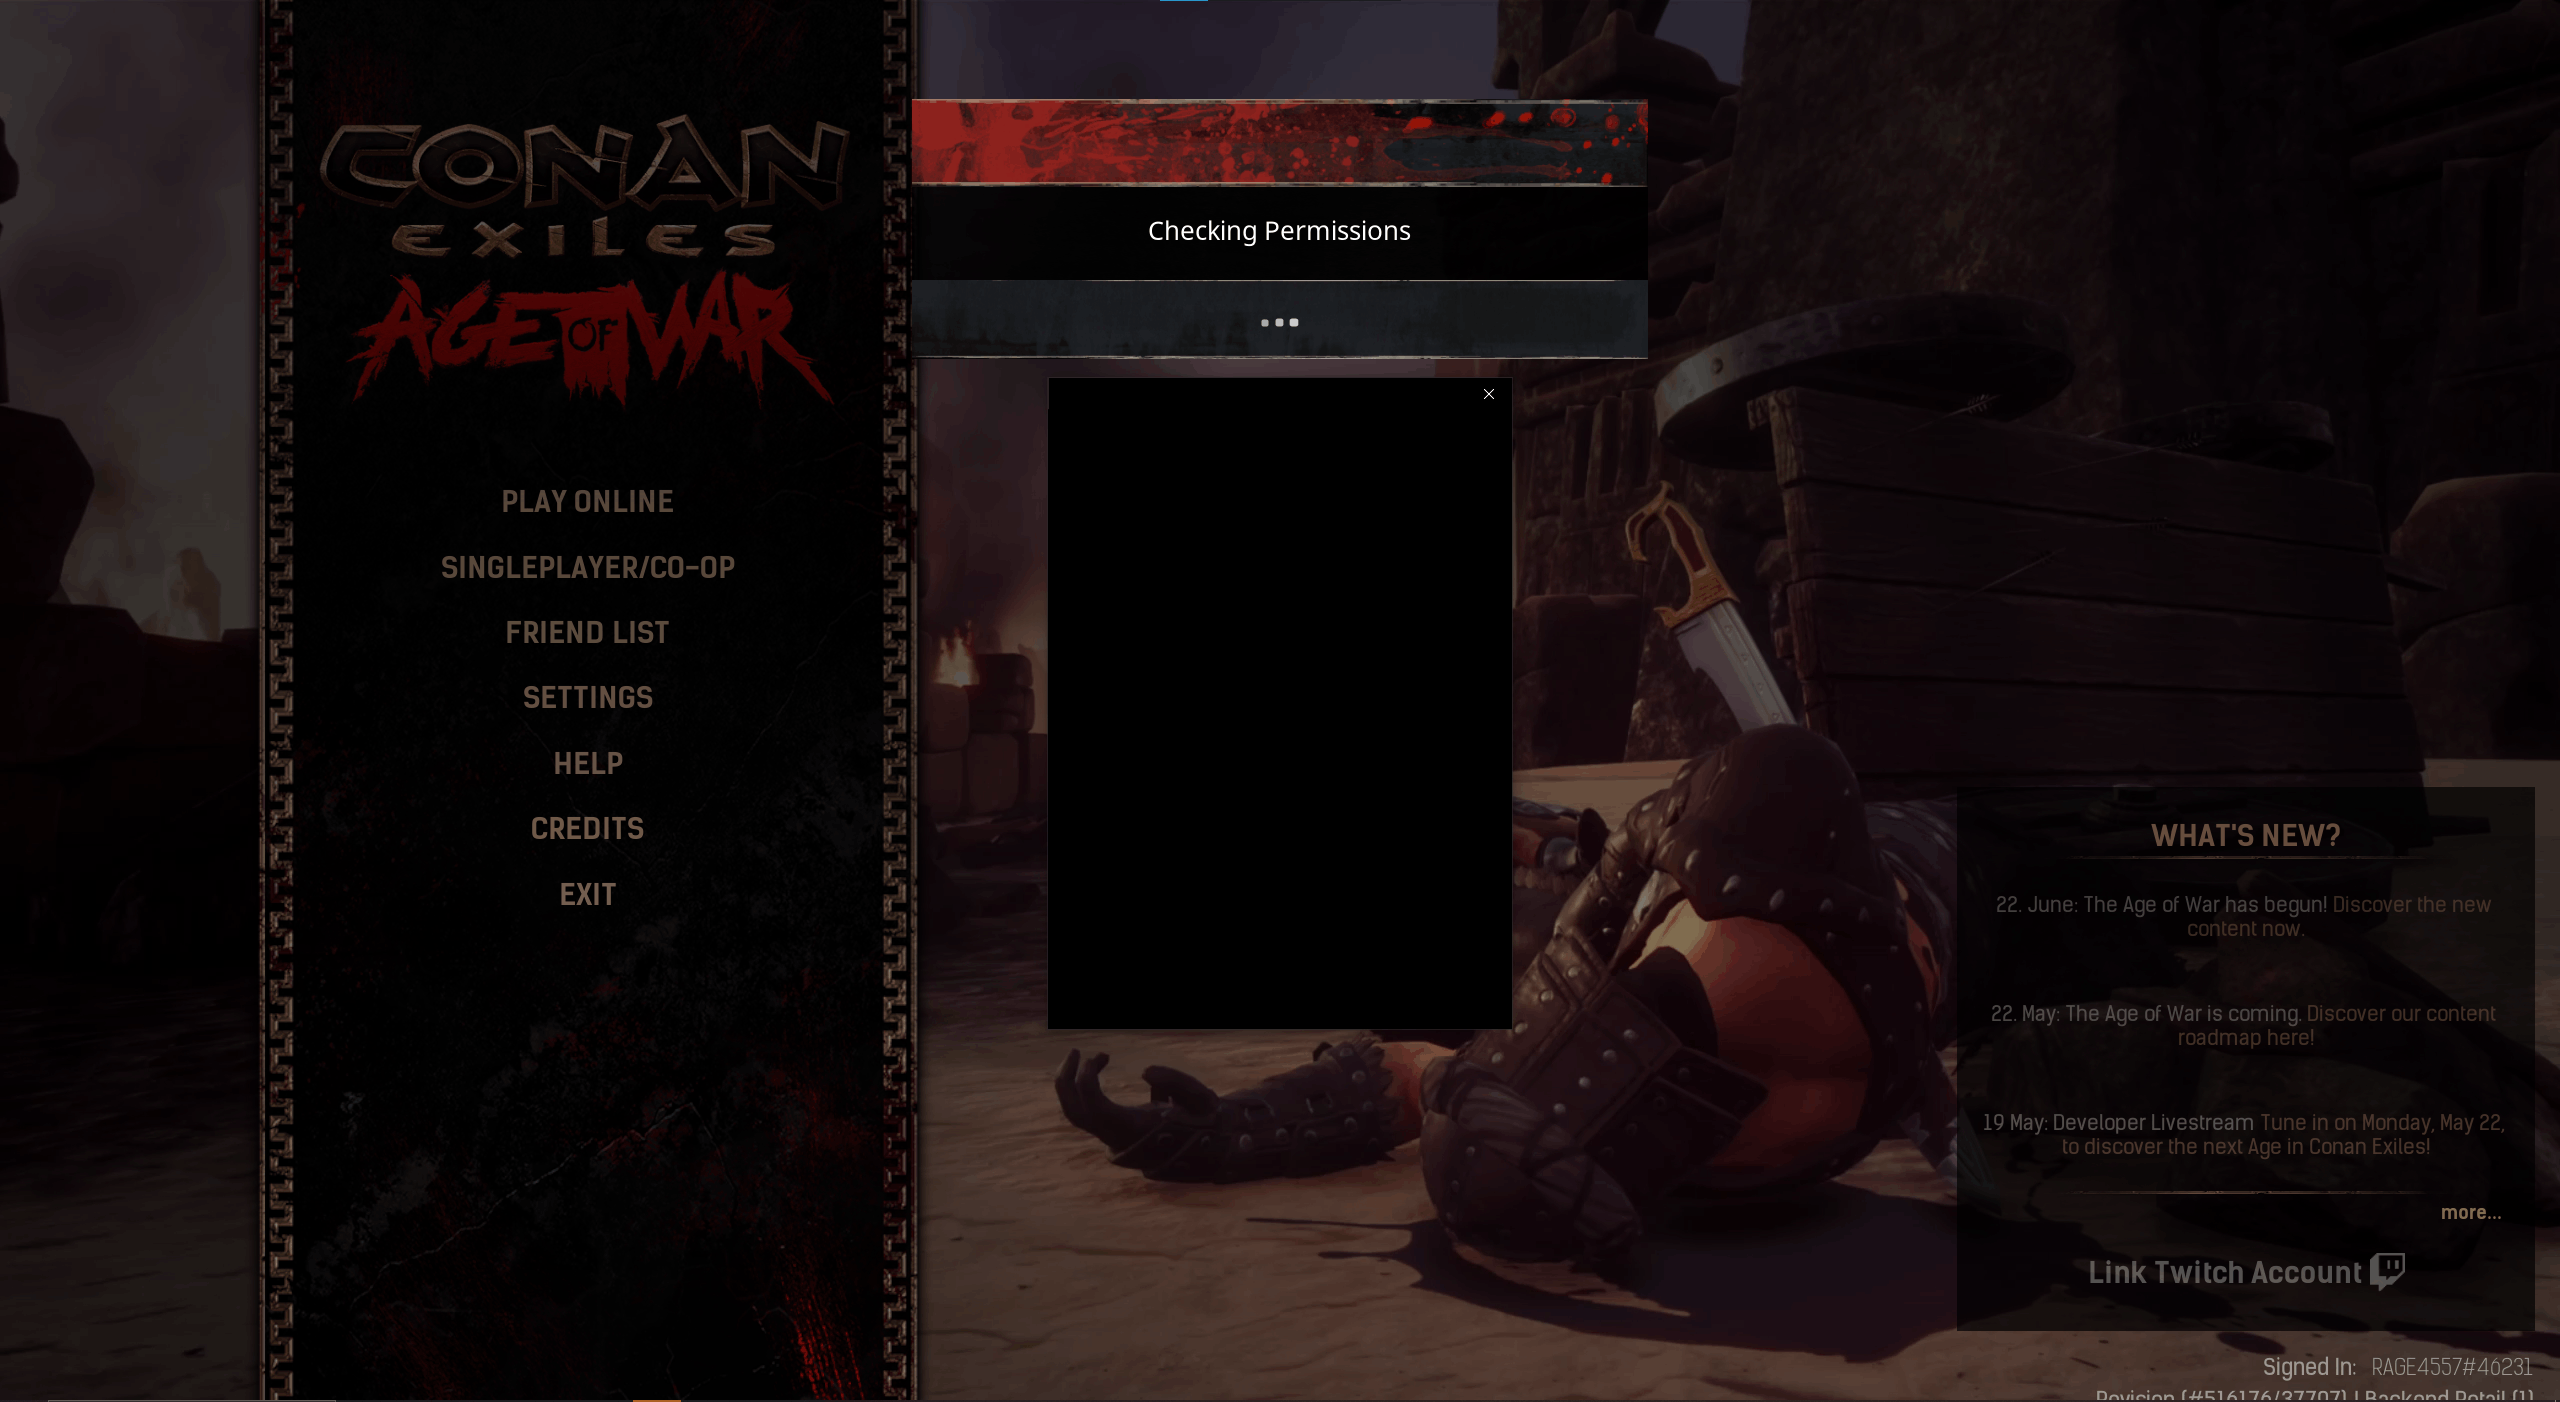 Conan Exiles "Checking Permissions" Pop-up Endless on Black Screen [​IMG]